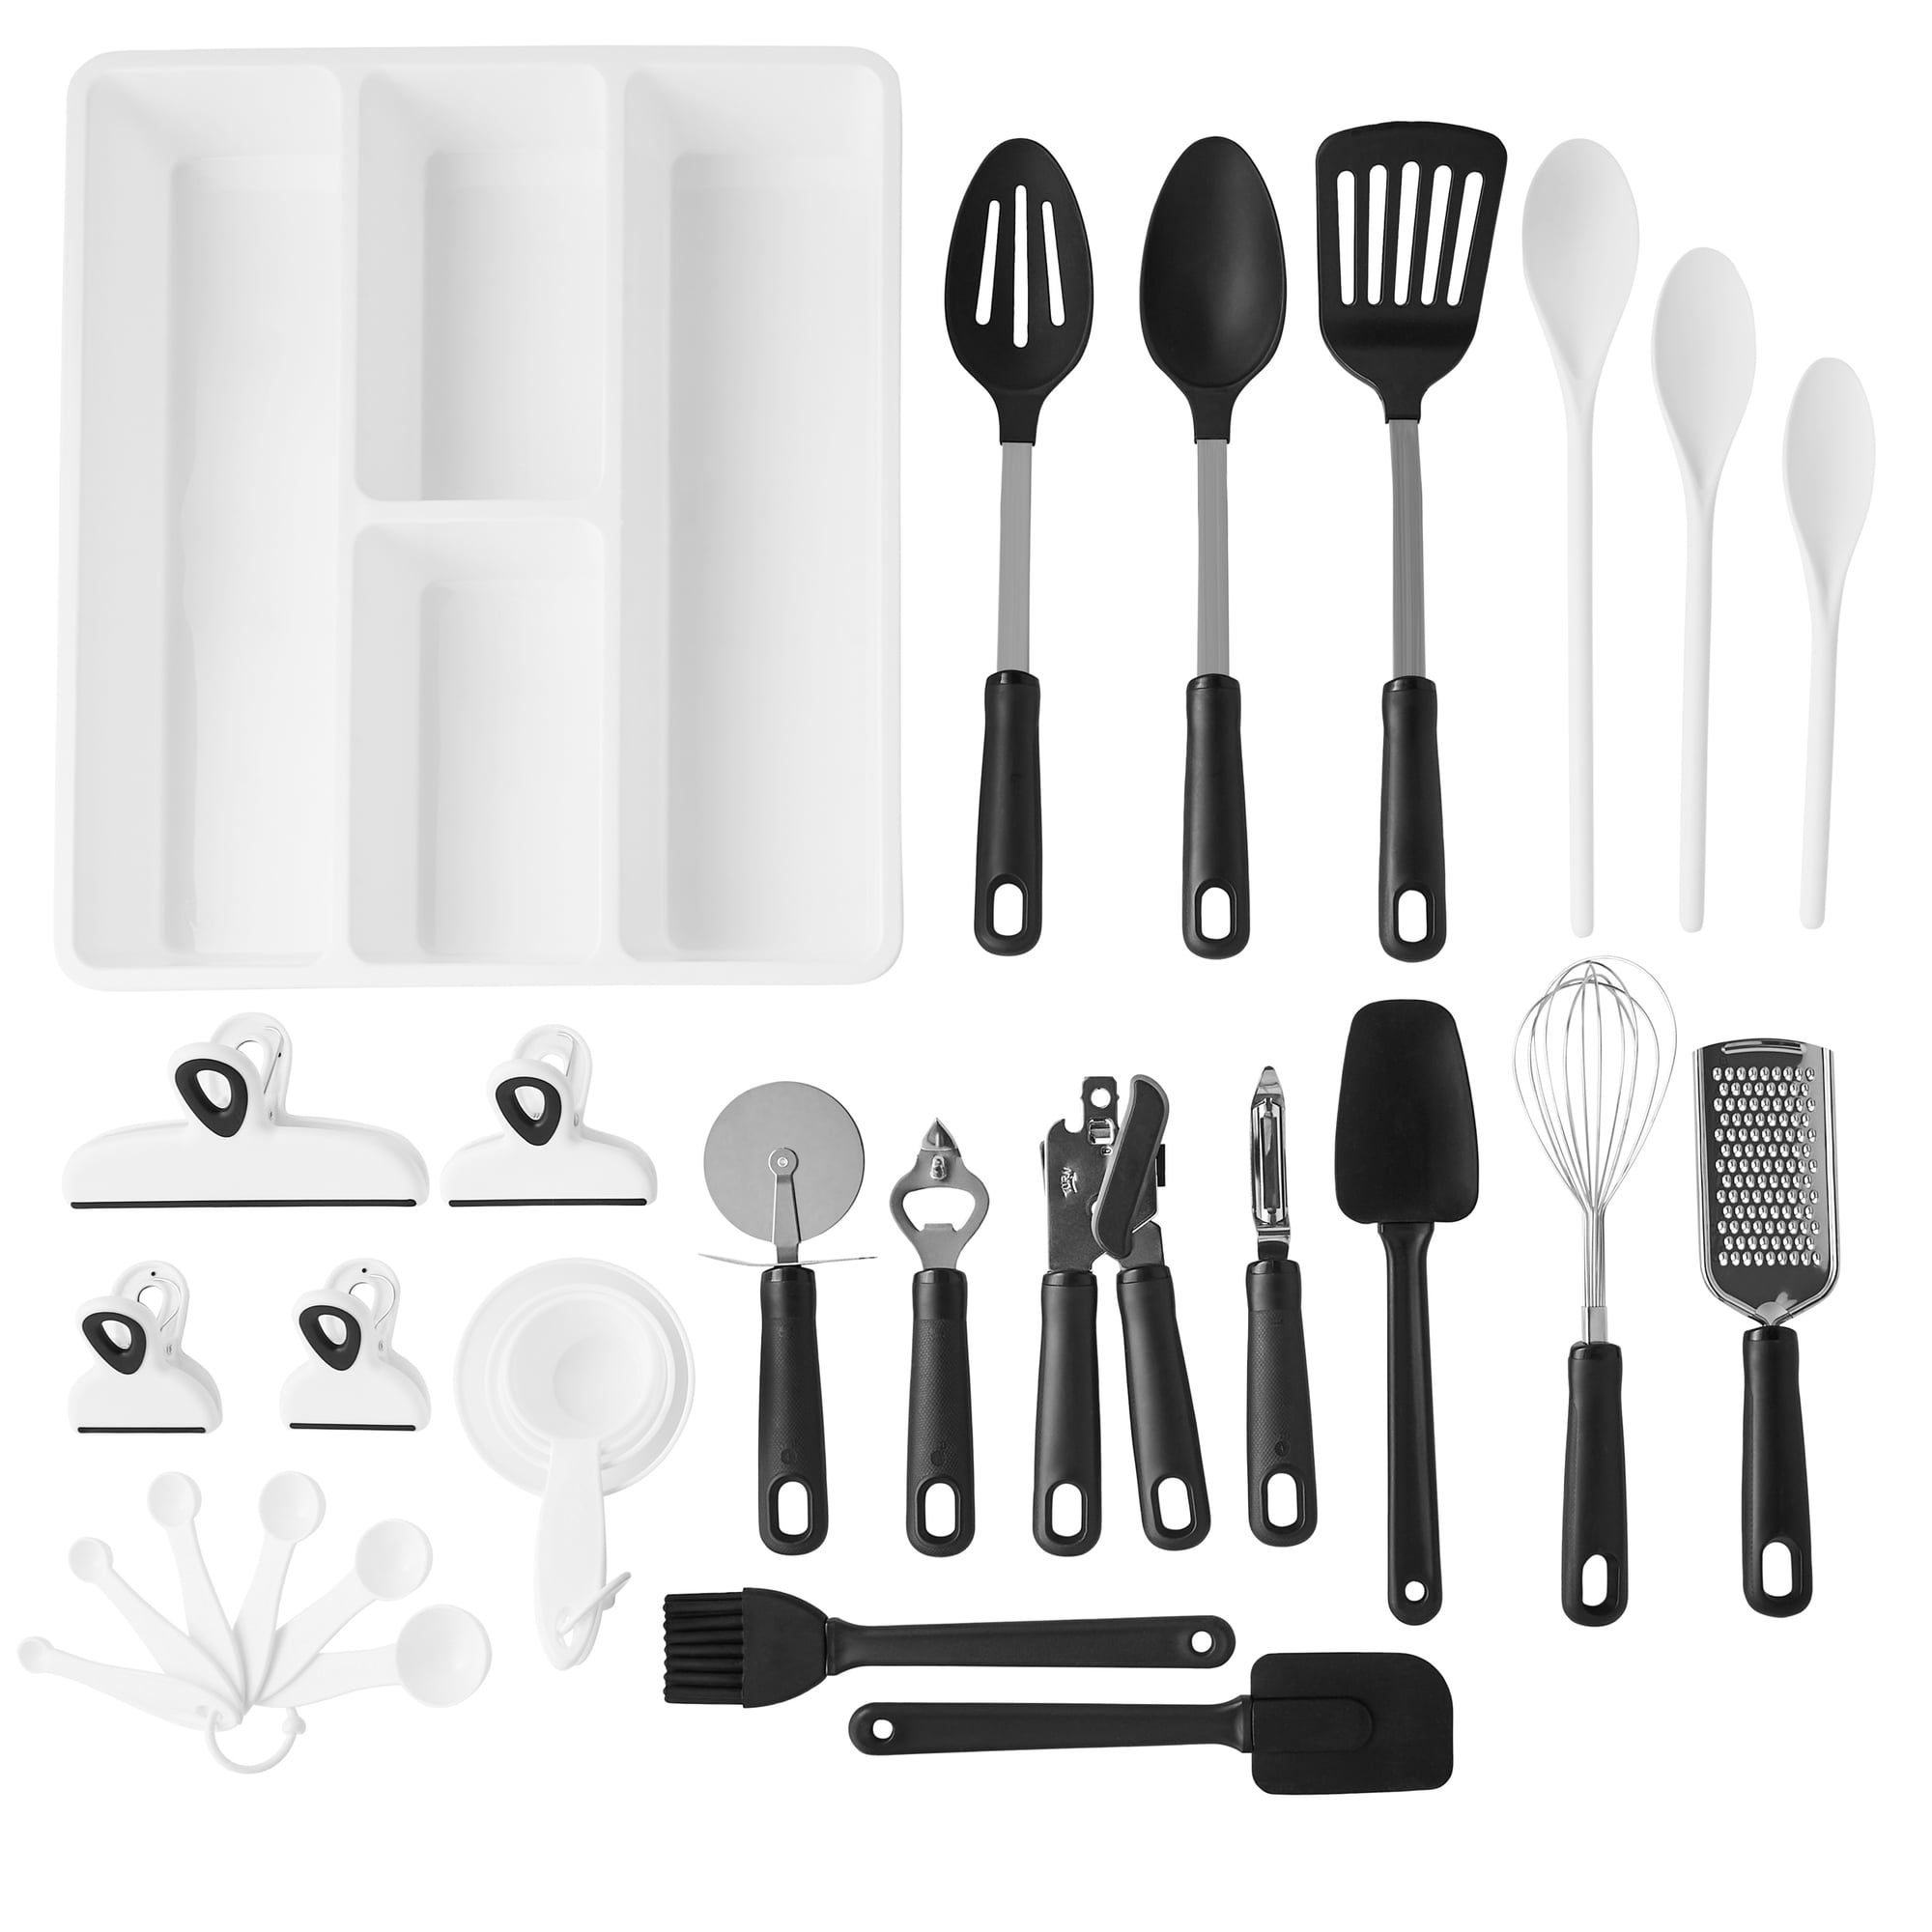 Mainstays 30-Piece Kitchen Gadget Set with Cooking Utensils, Measuring Cups, Clips, and Drawer Organizer, Black/White